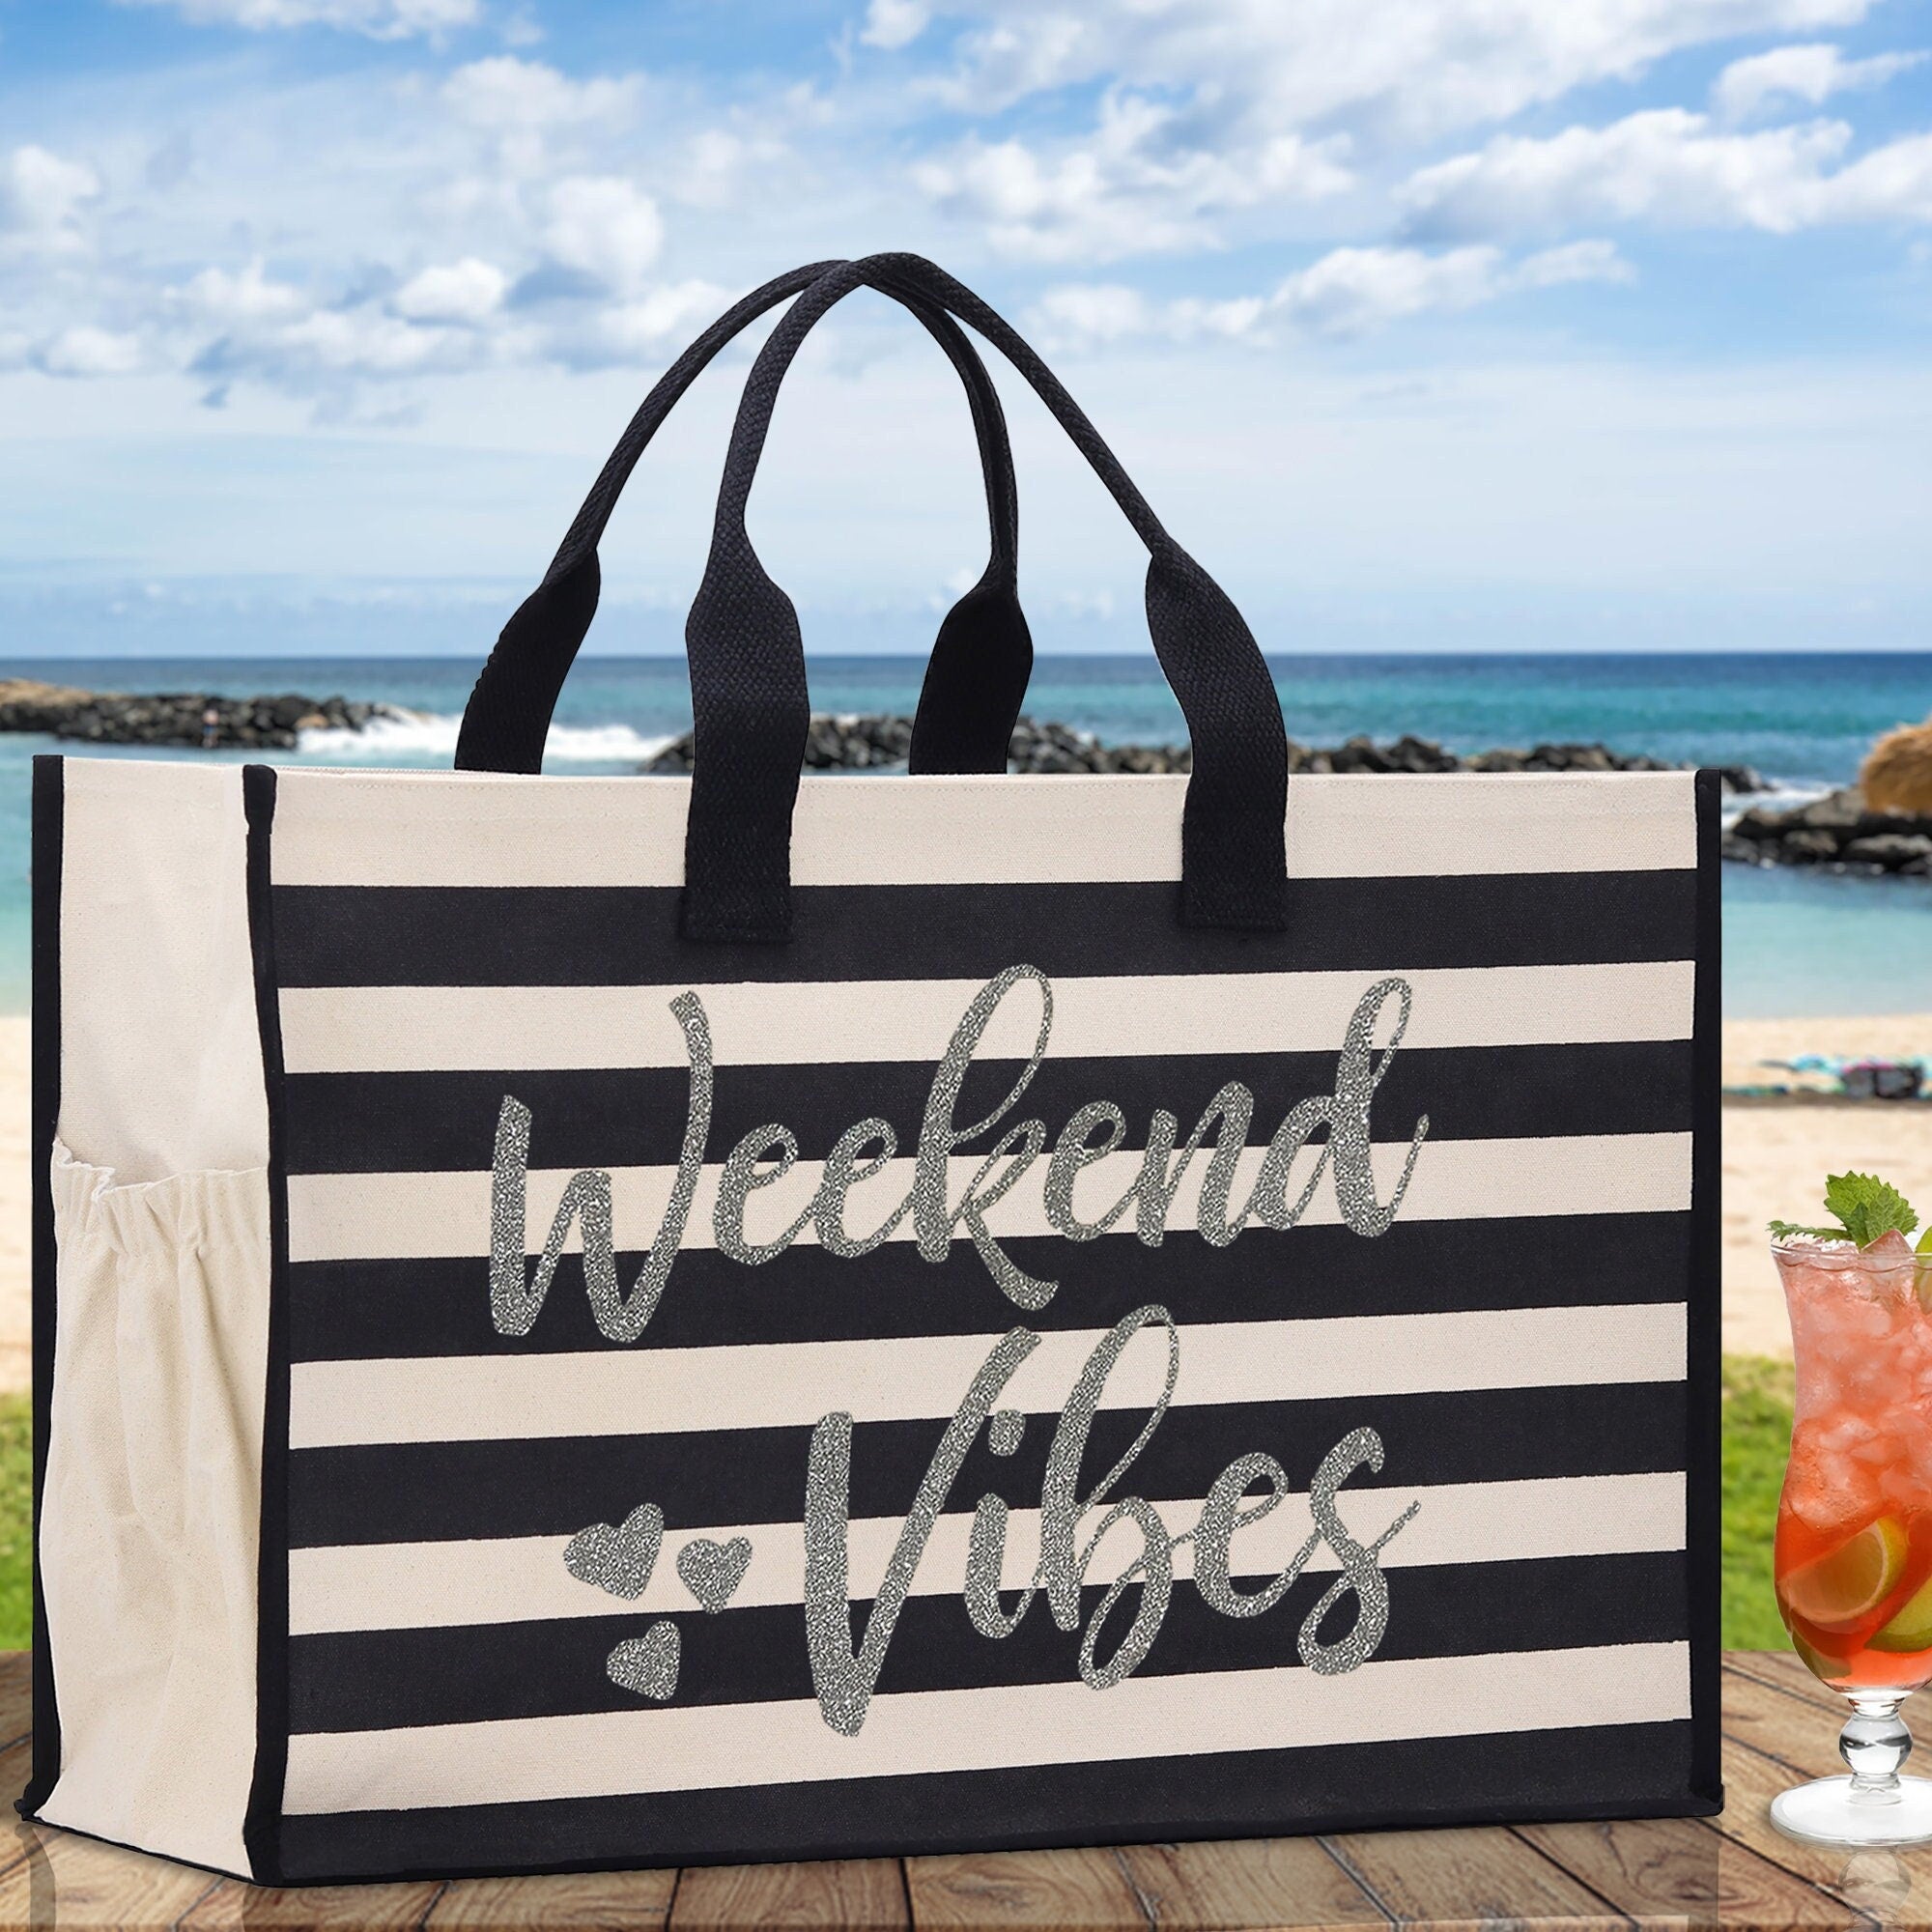 Weekend Vibes Cabana Tote Bag XL - Oversized Chic Tote Bag with Zipper and Inner Pocket - Beach Bag for Women - Weekender Beach Tote